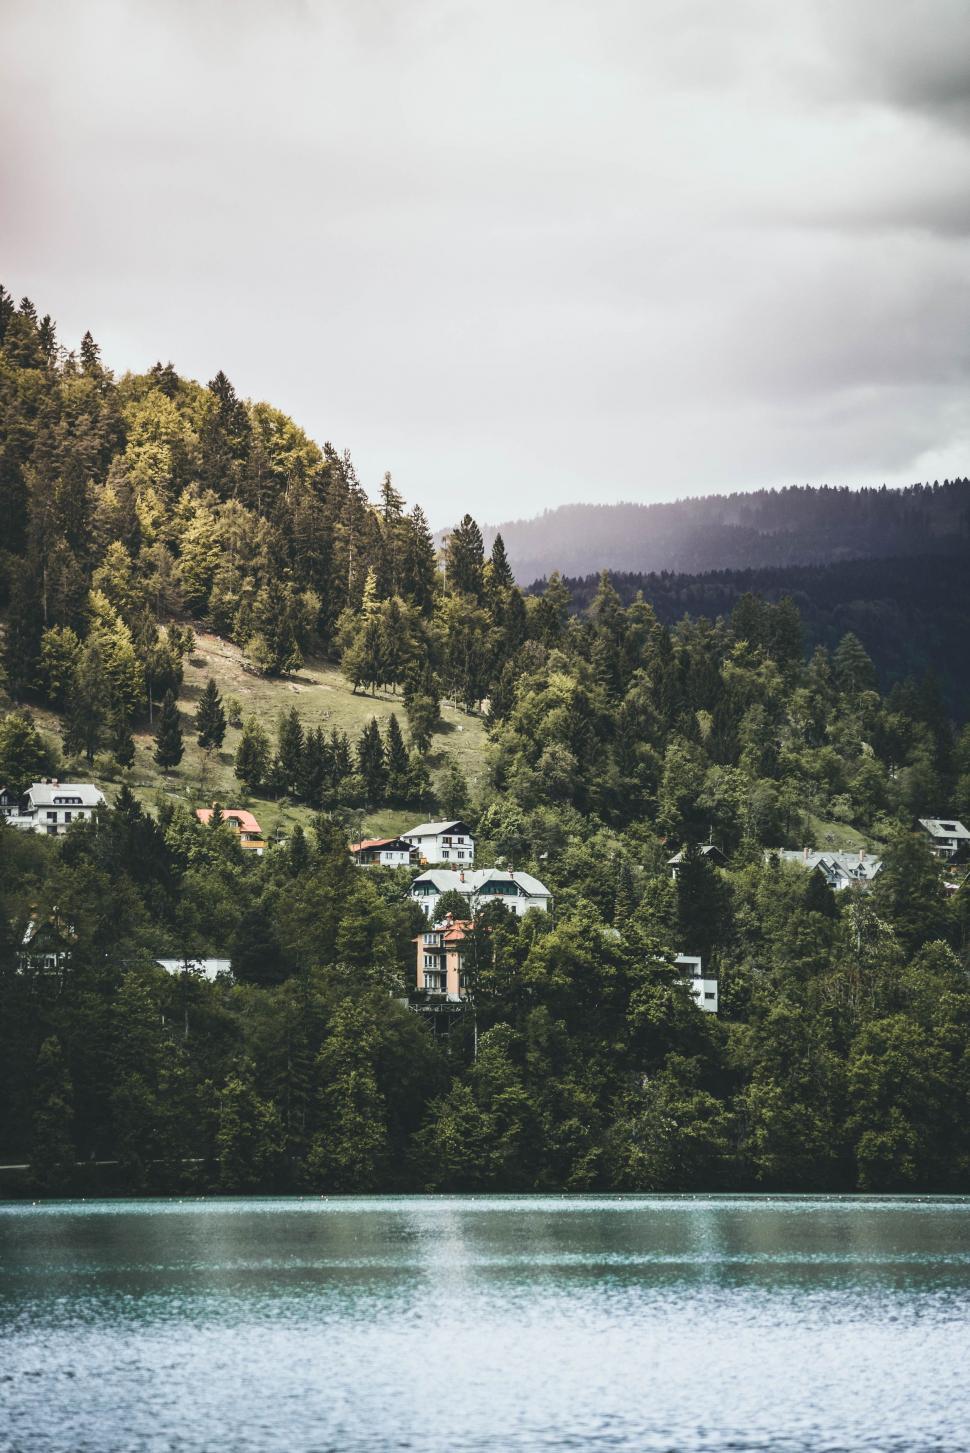 Free Image of Lake Surrounded by Trees and Houses 